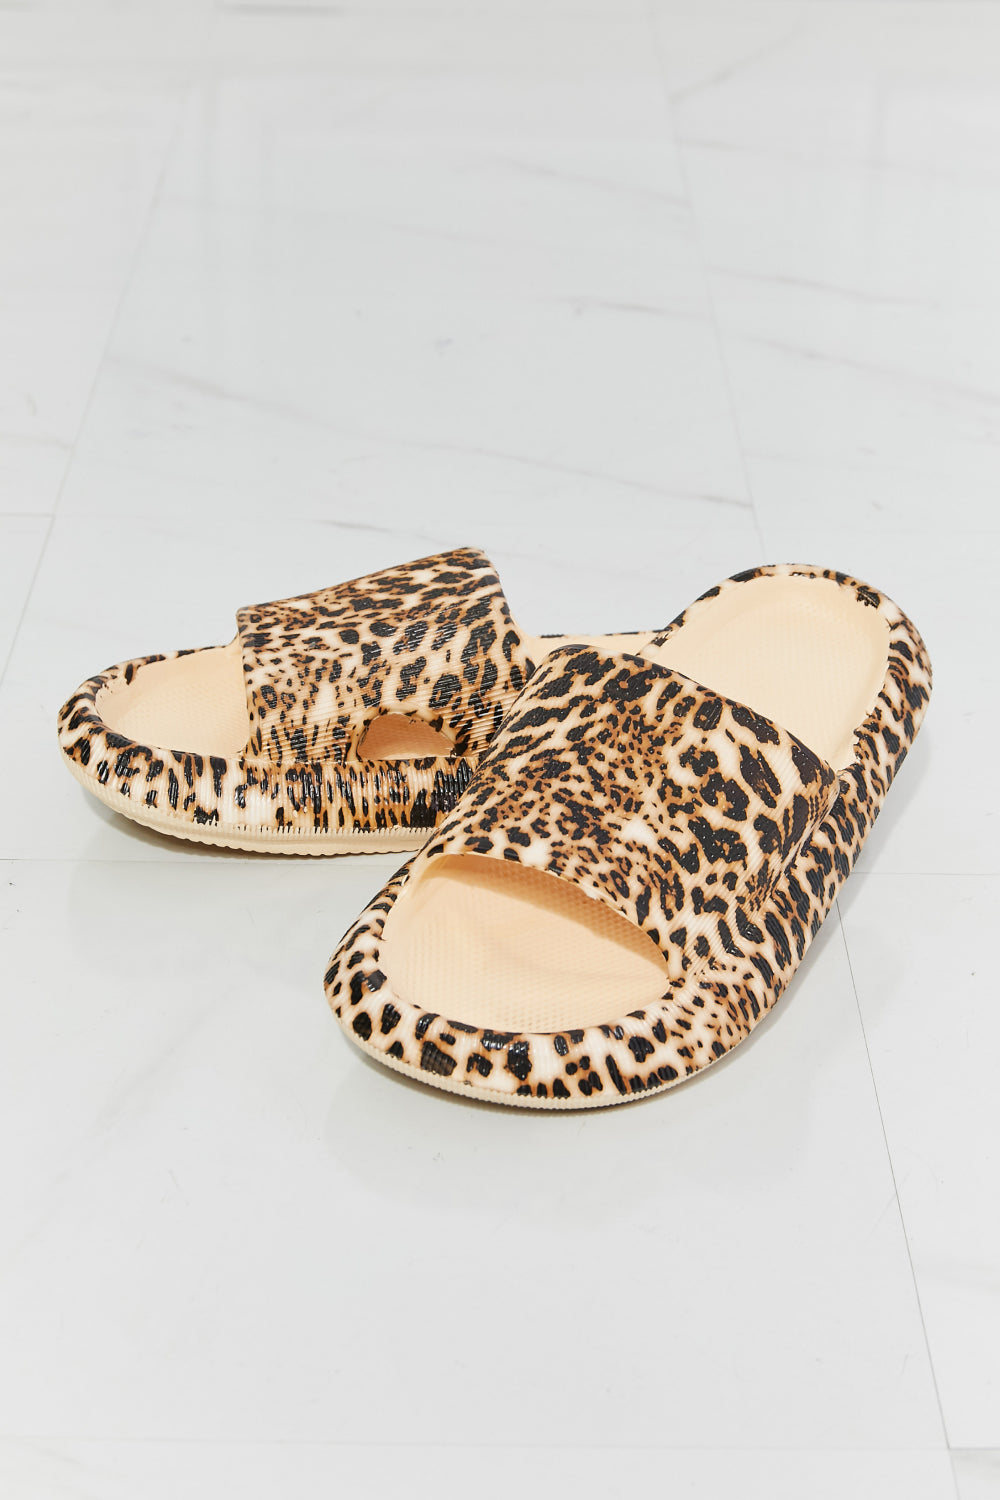 MMShoes Arms Around Me Open Toe Slide in Leopard - Tigbul's Fashion